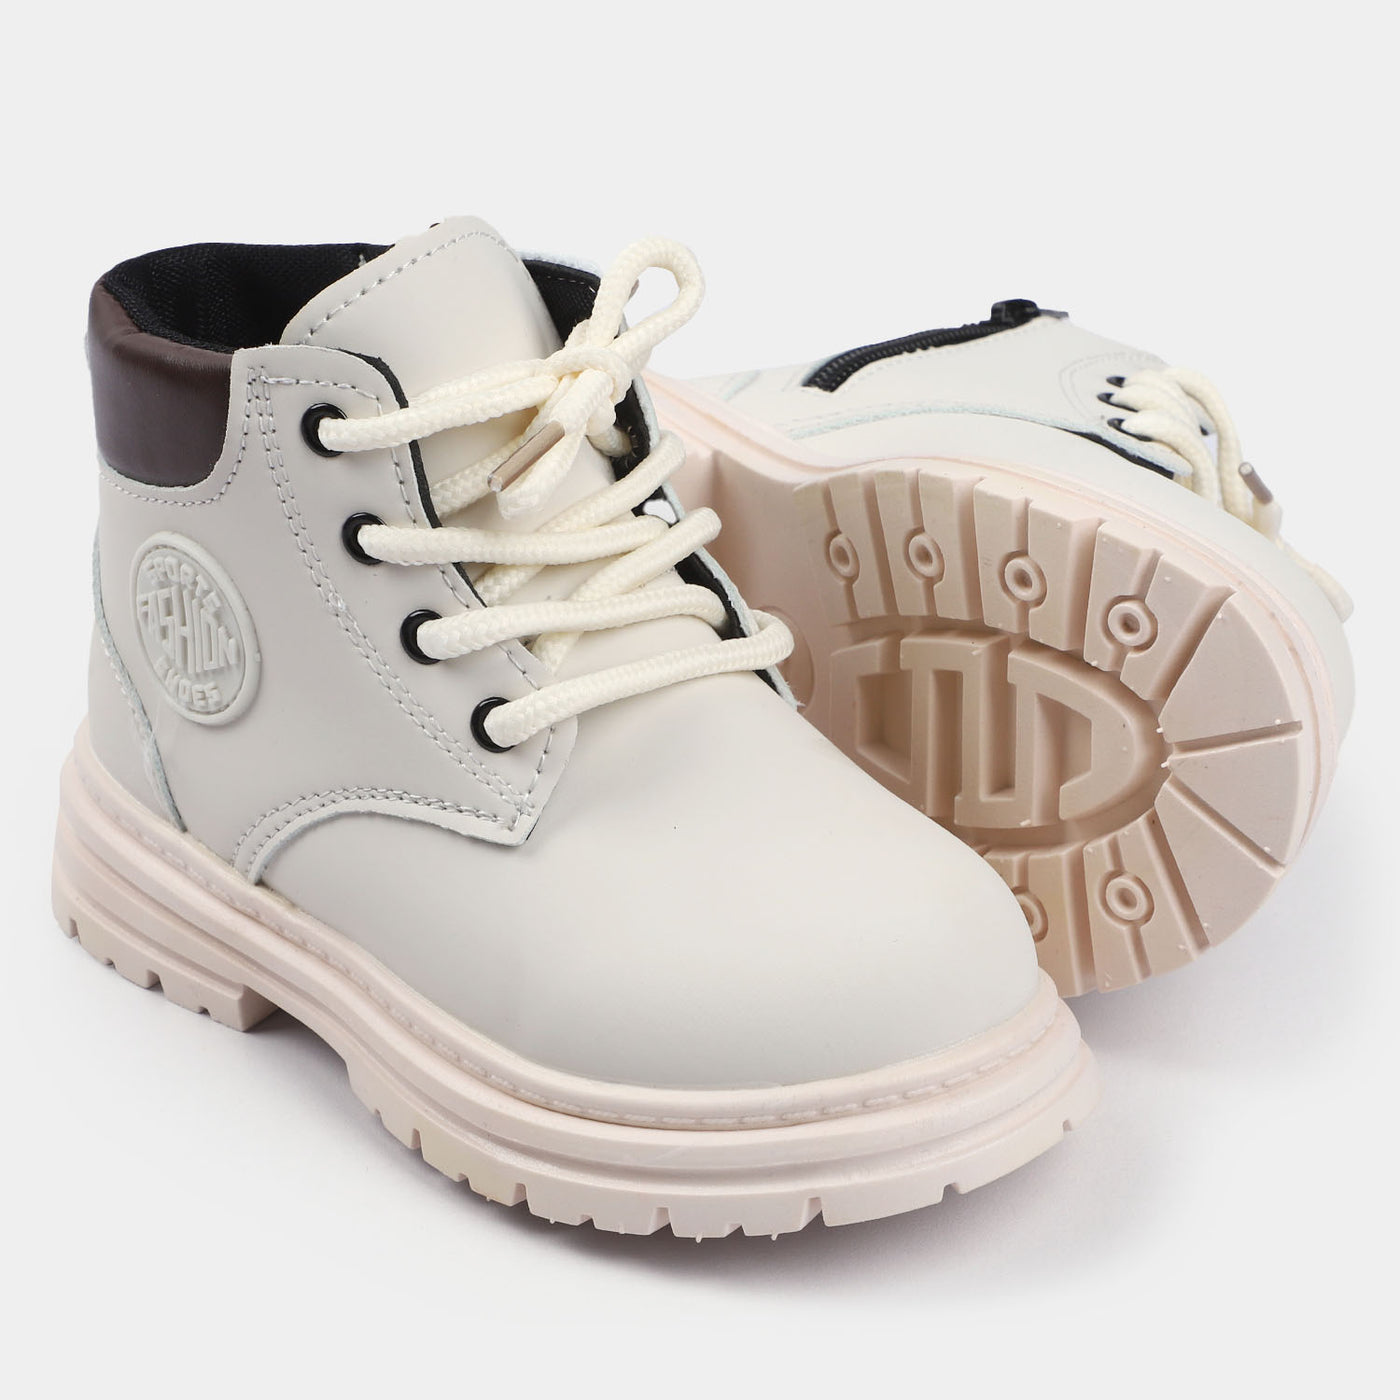 Casual Lace Up Boots For Boys PS-07-White